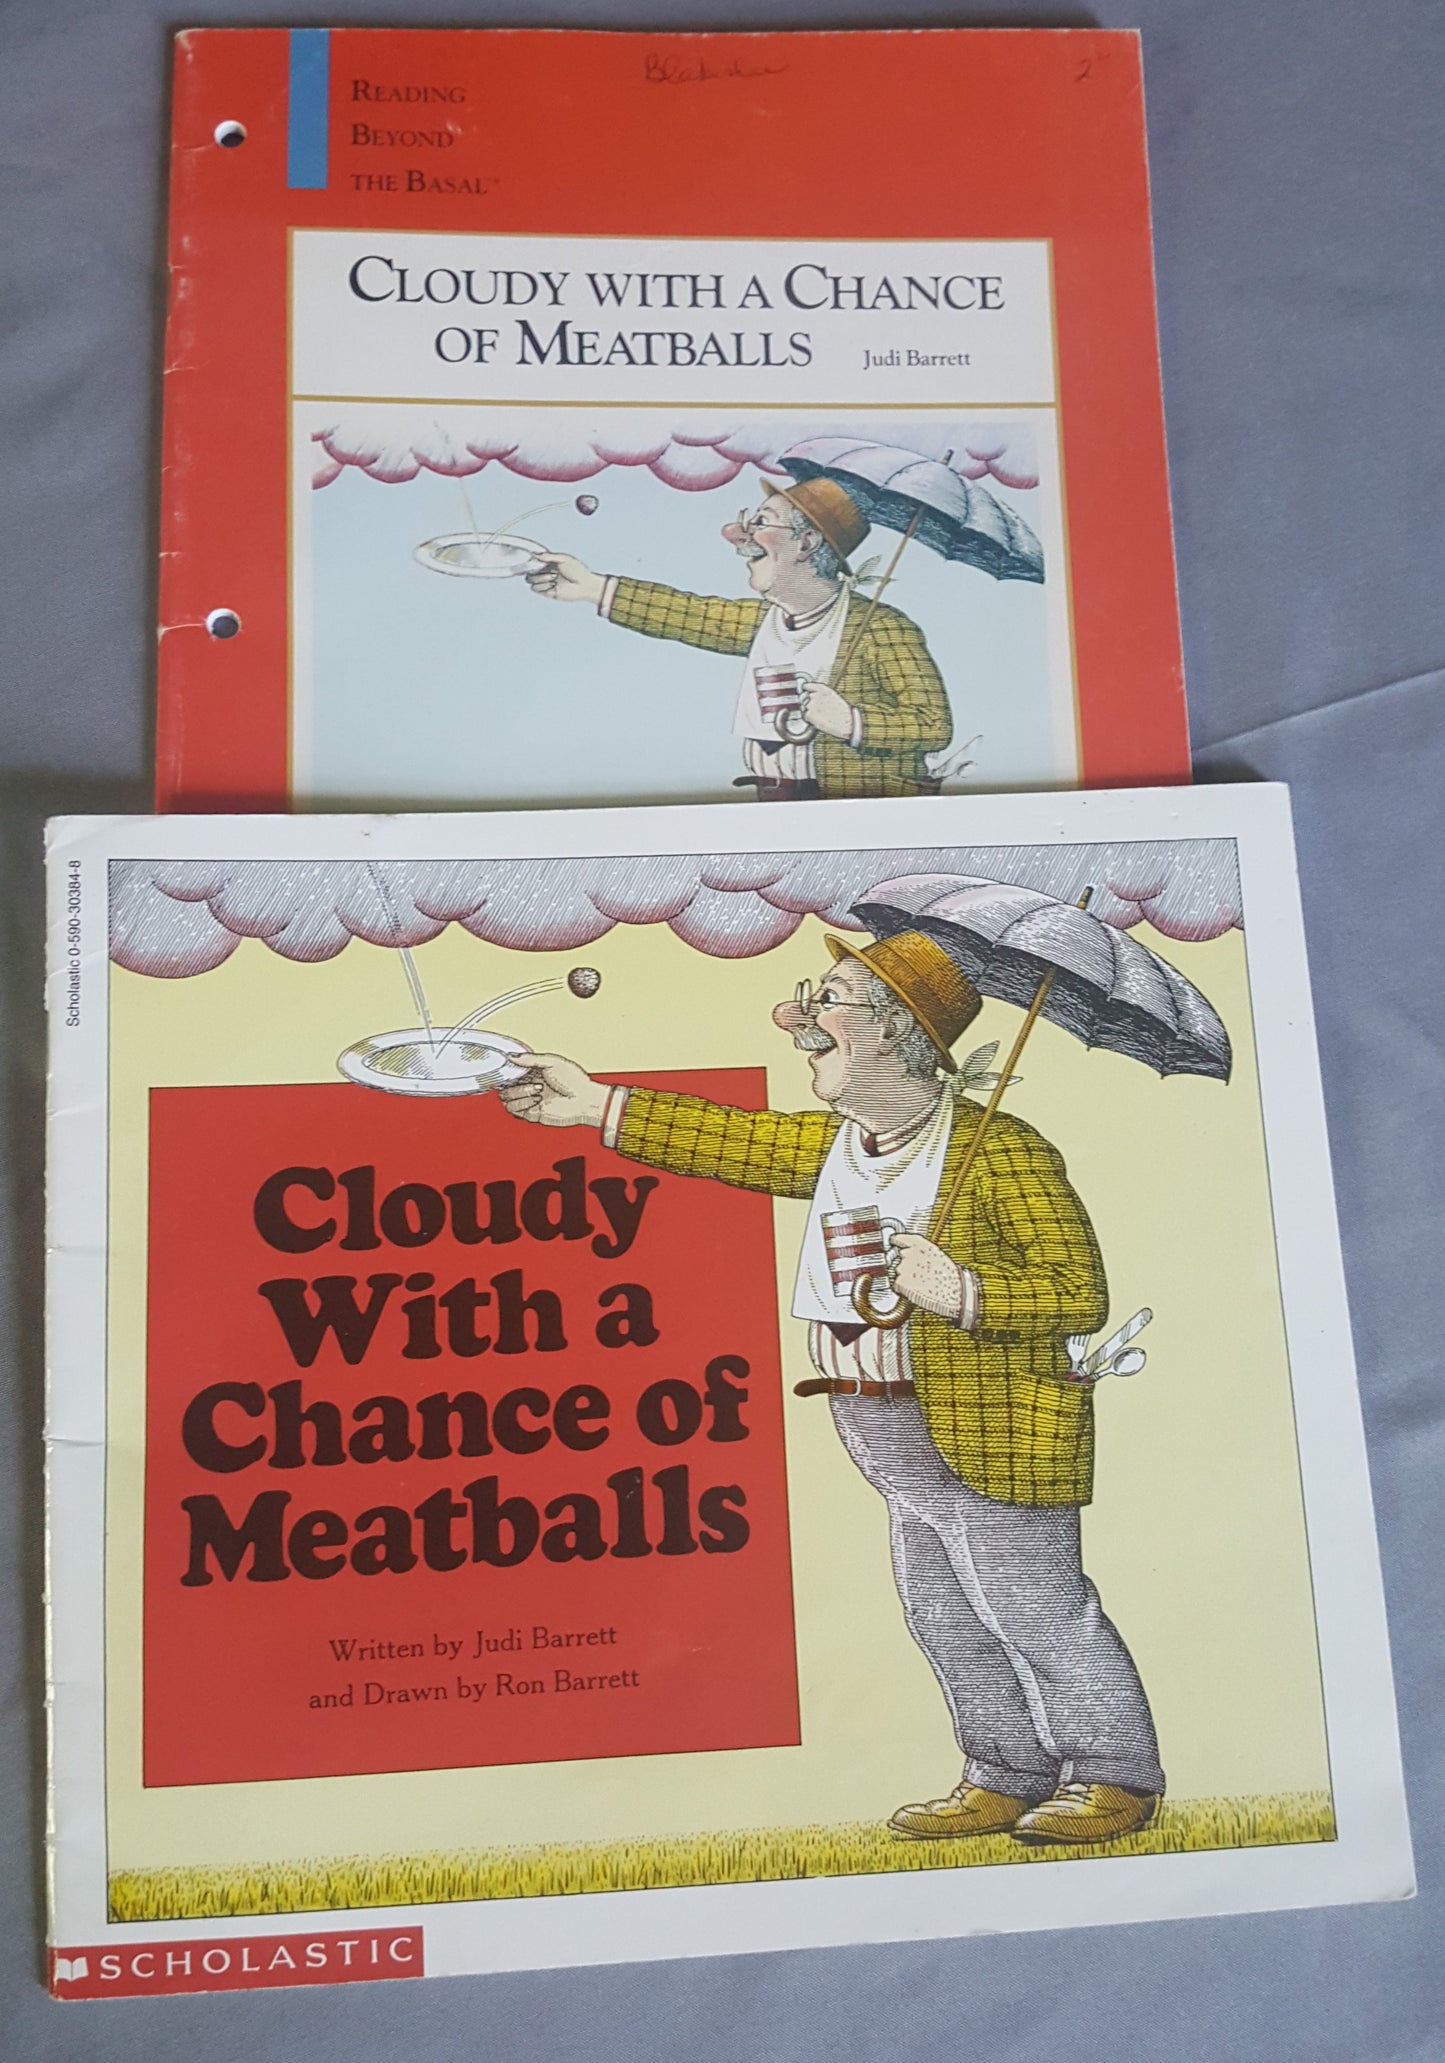 Cloudy With a Chance of Meatballs reader and study guide